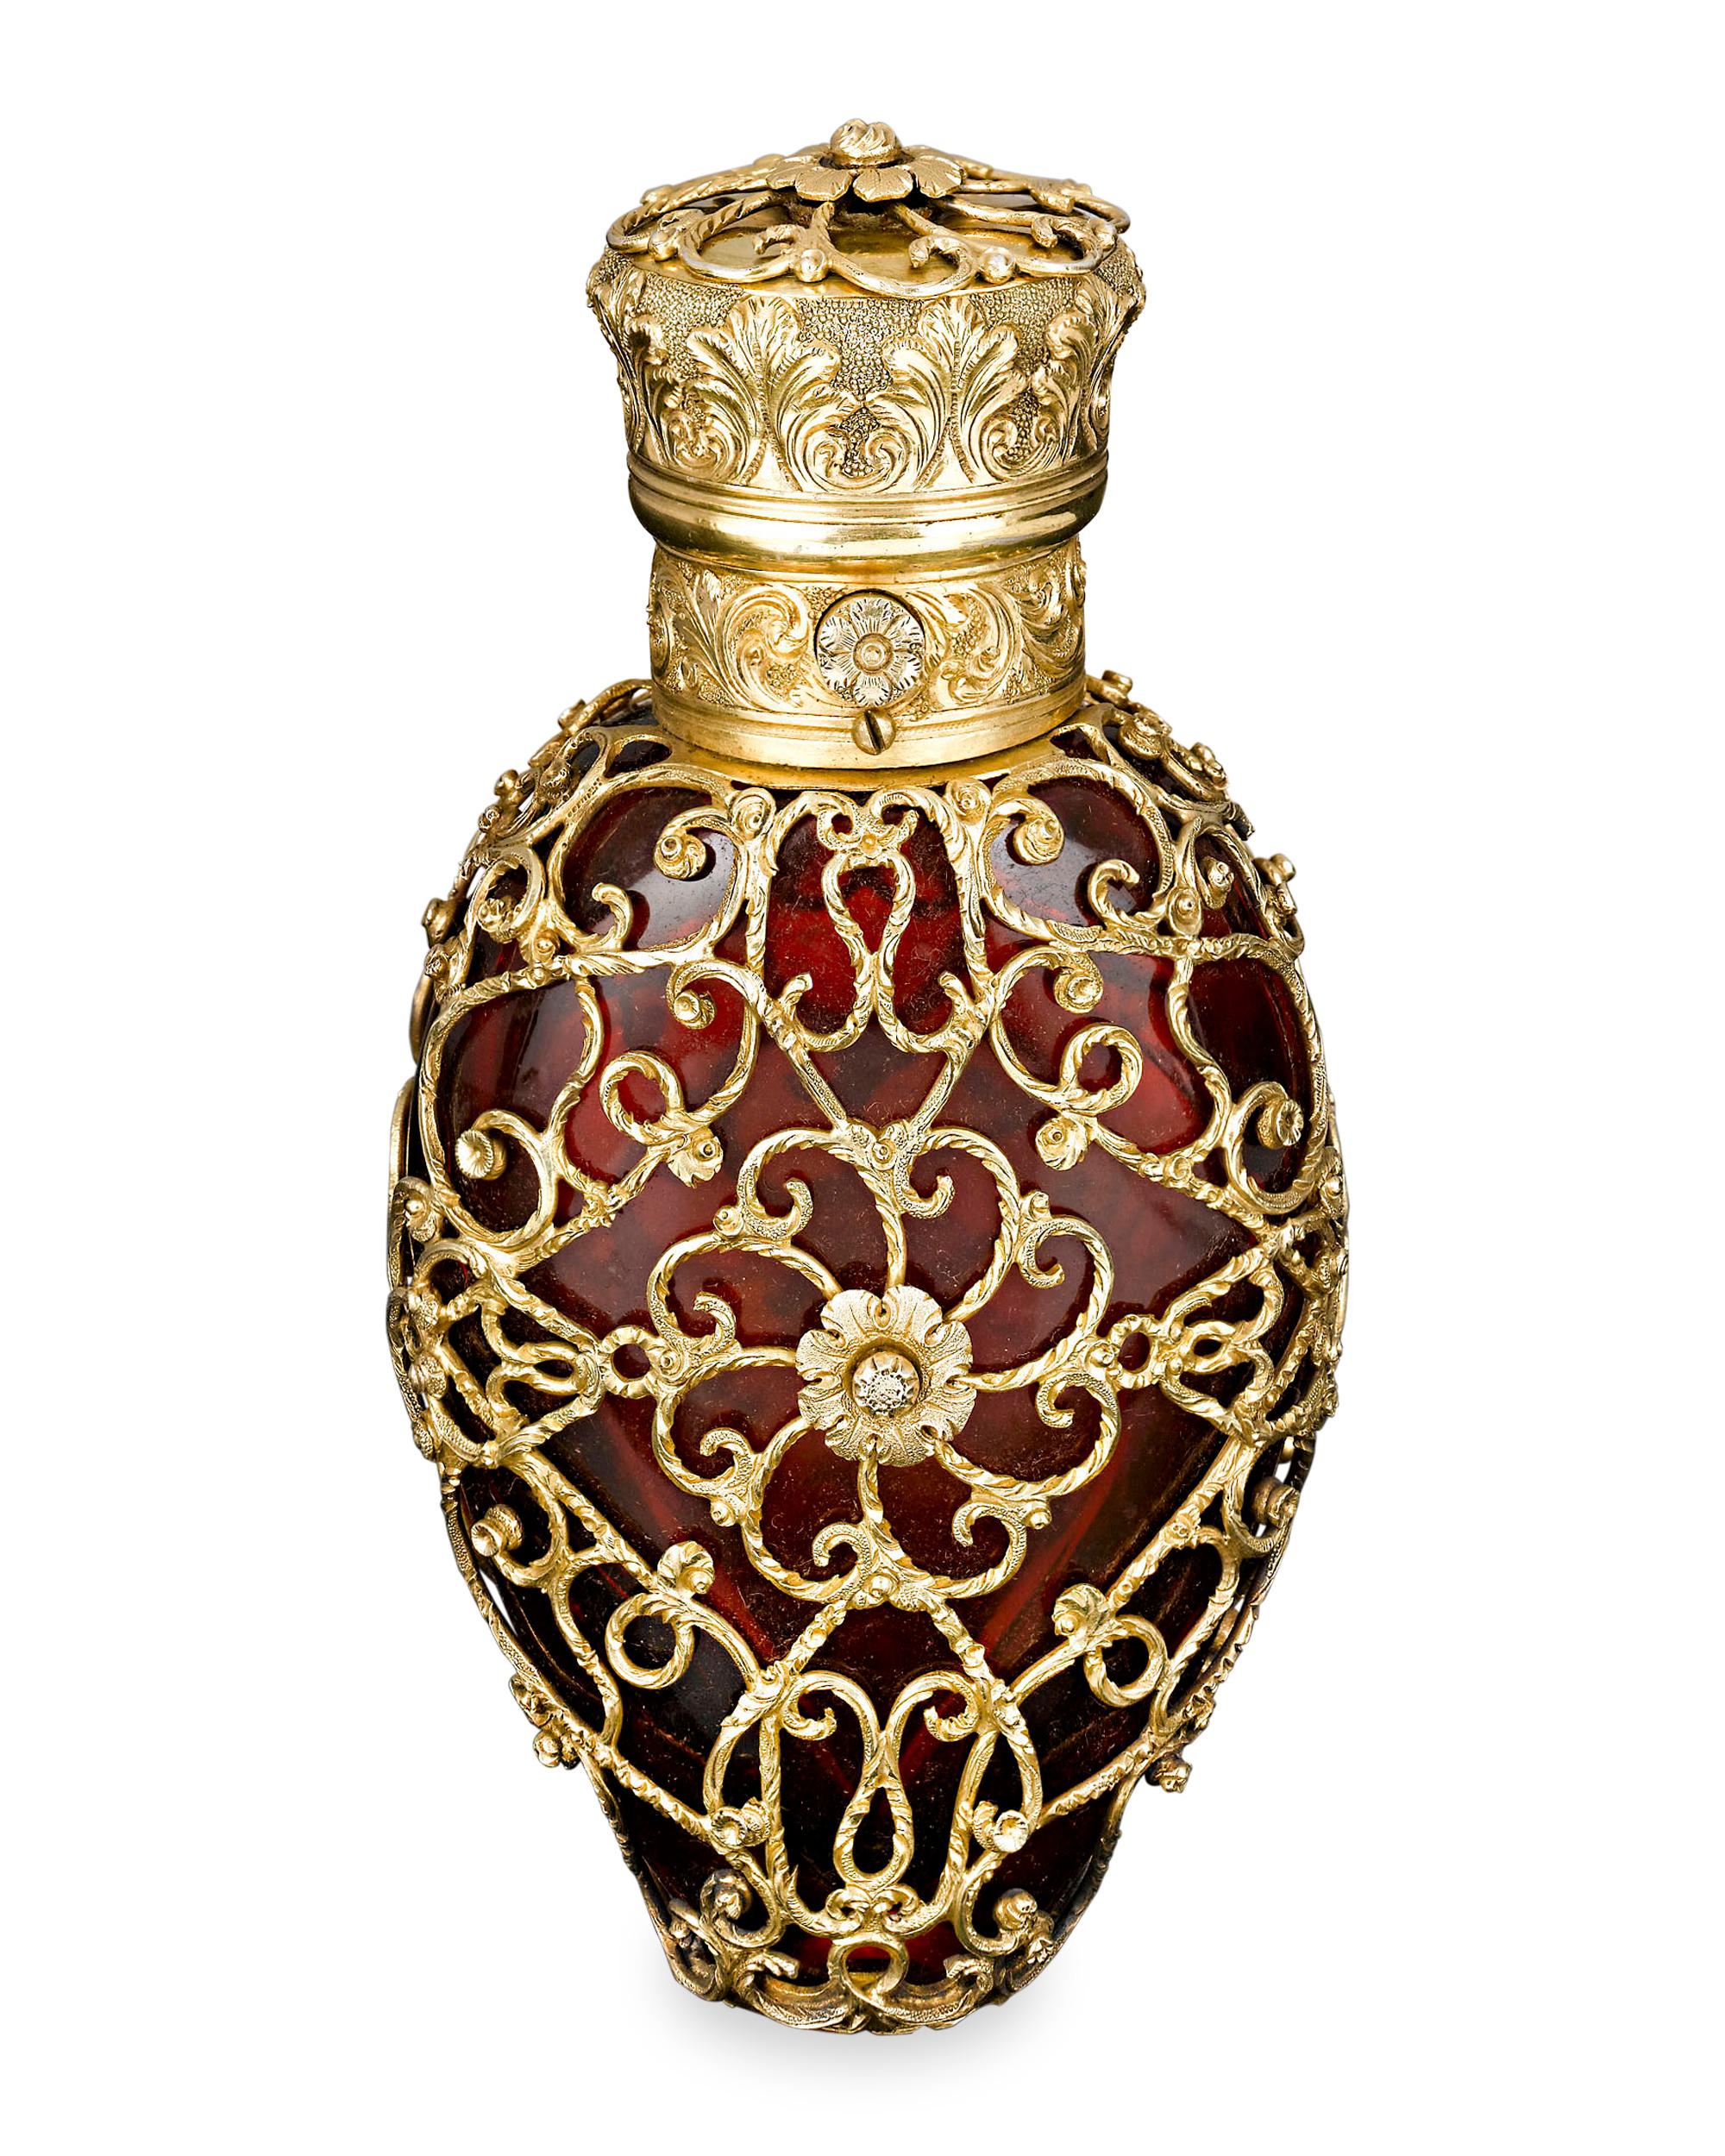 Incredible silver gilt pierced work envelopes this red glass perfume bottle by London glass artisan Thomas Robert Mellish. The spring-open lid of this elegant perfume is activated with the push of a button and features a most intricately chased